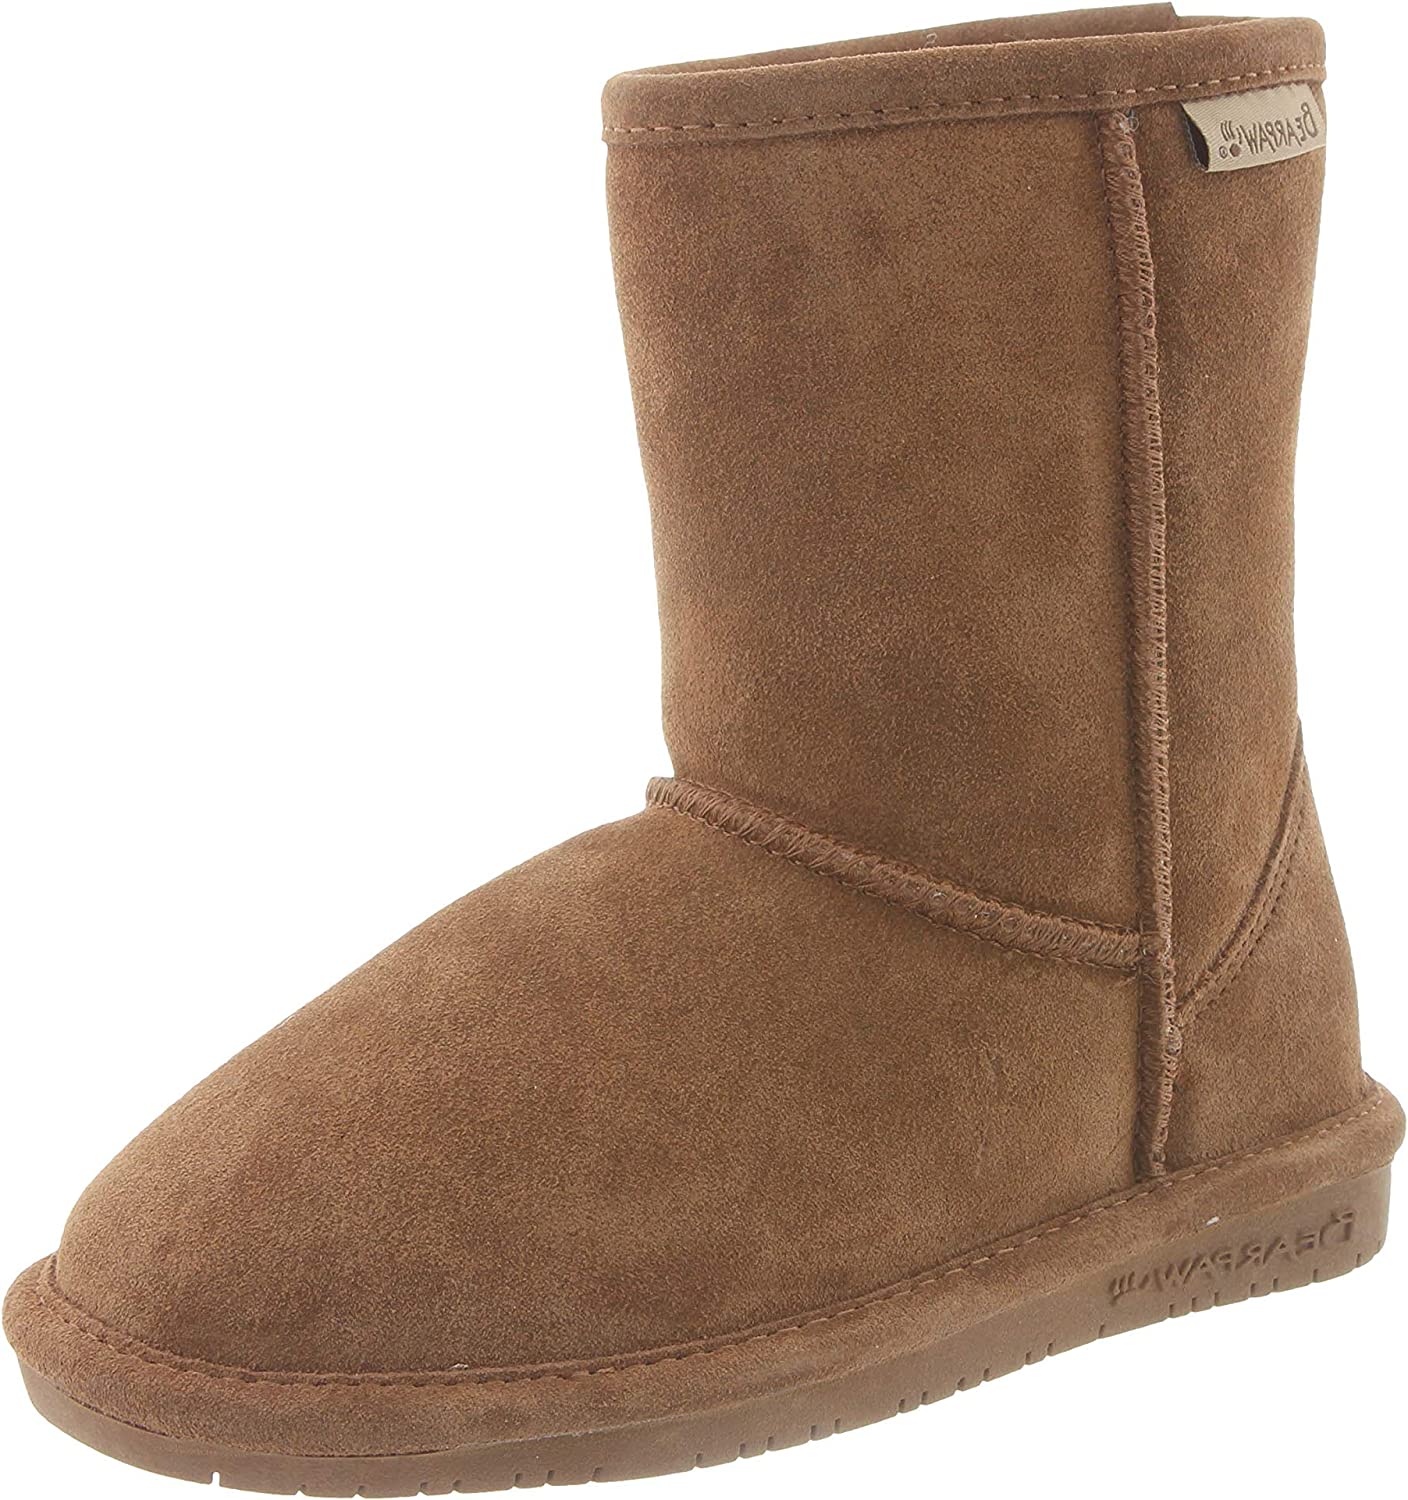 BEARPAW Girls Emma Short Suede Boots - Hickory - Y1